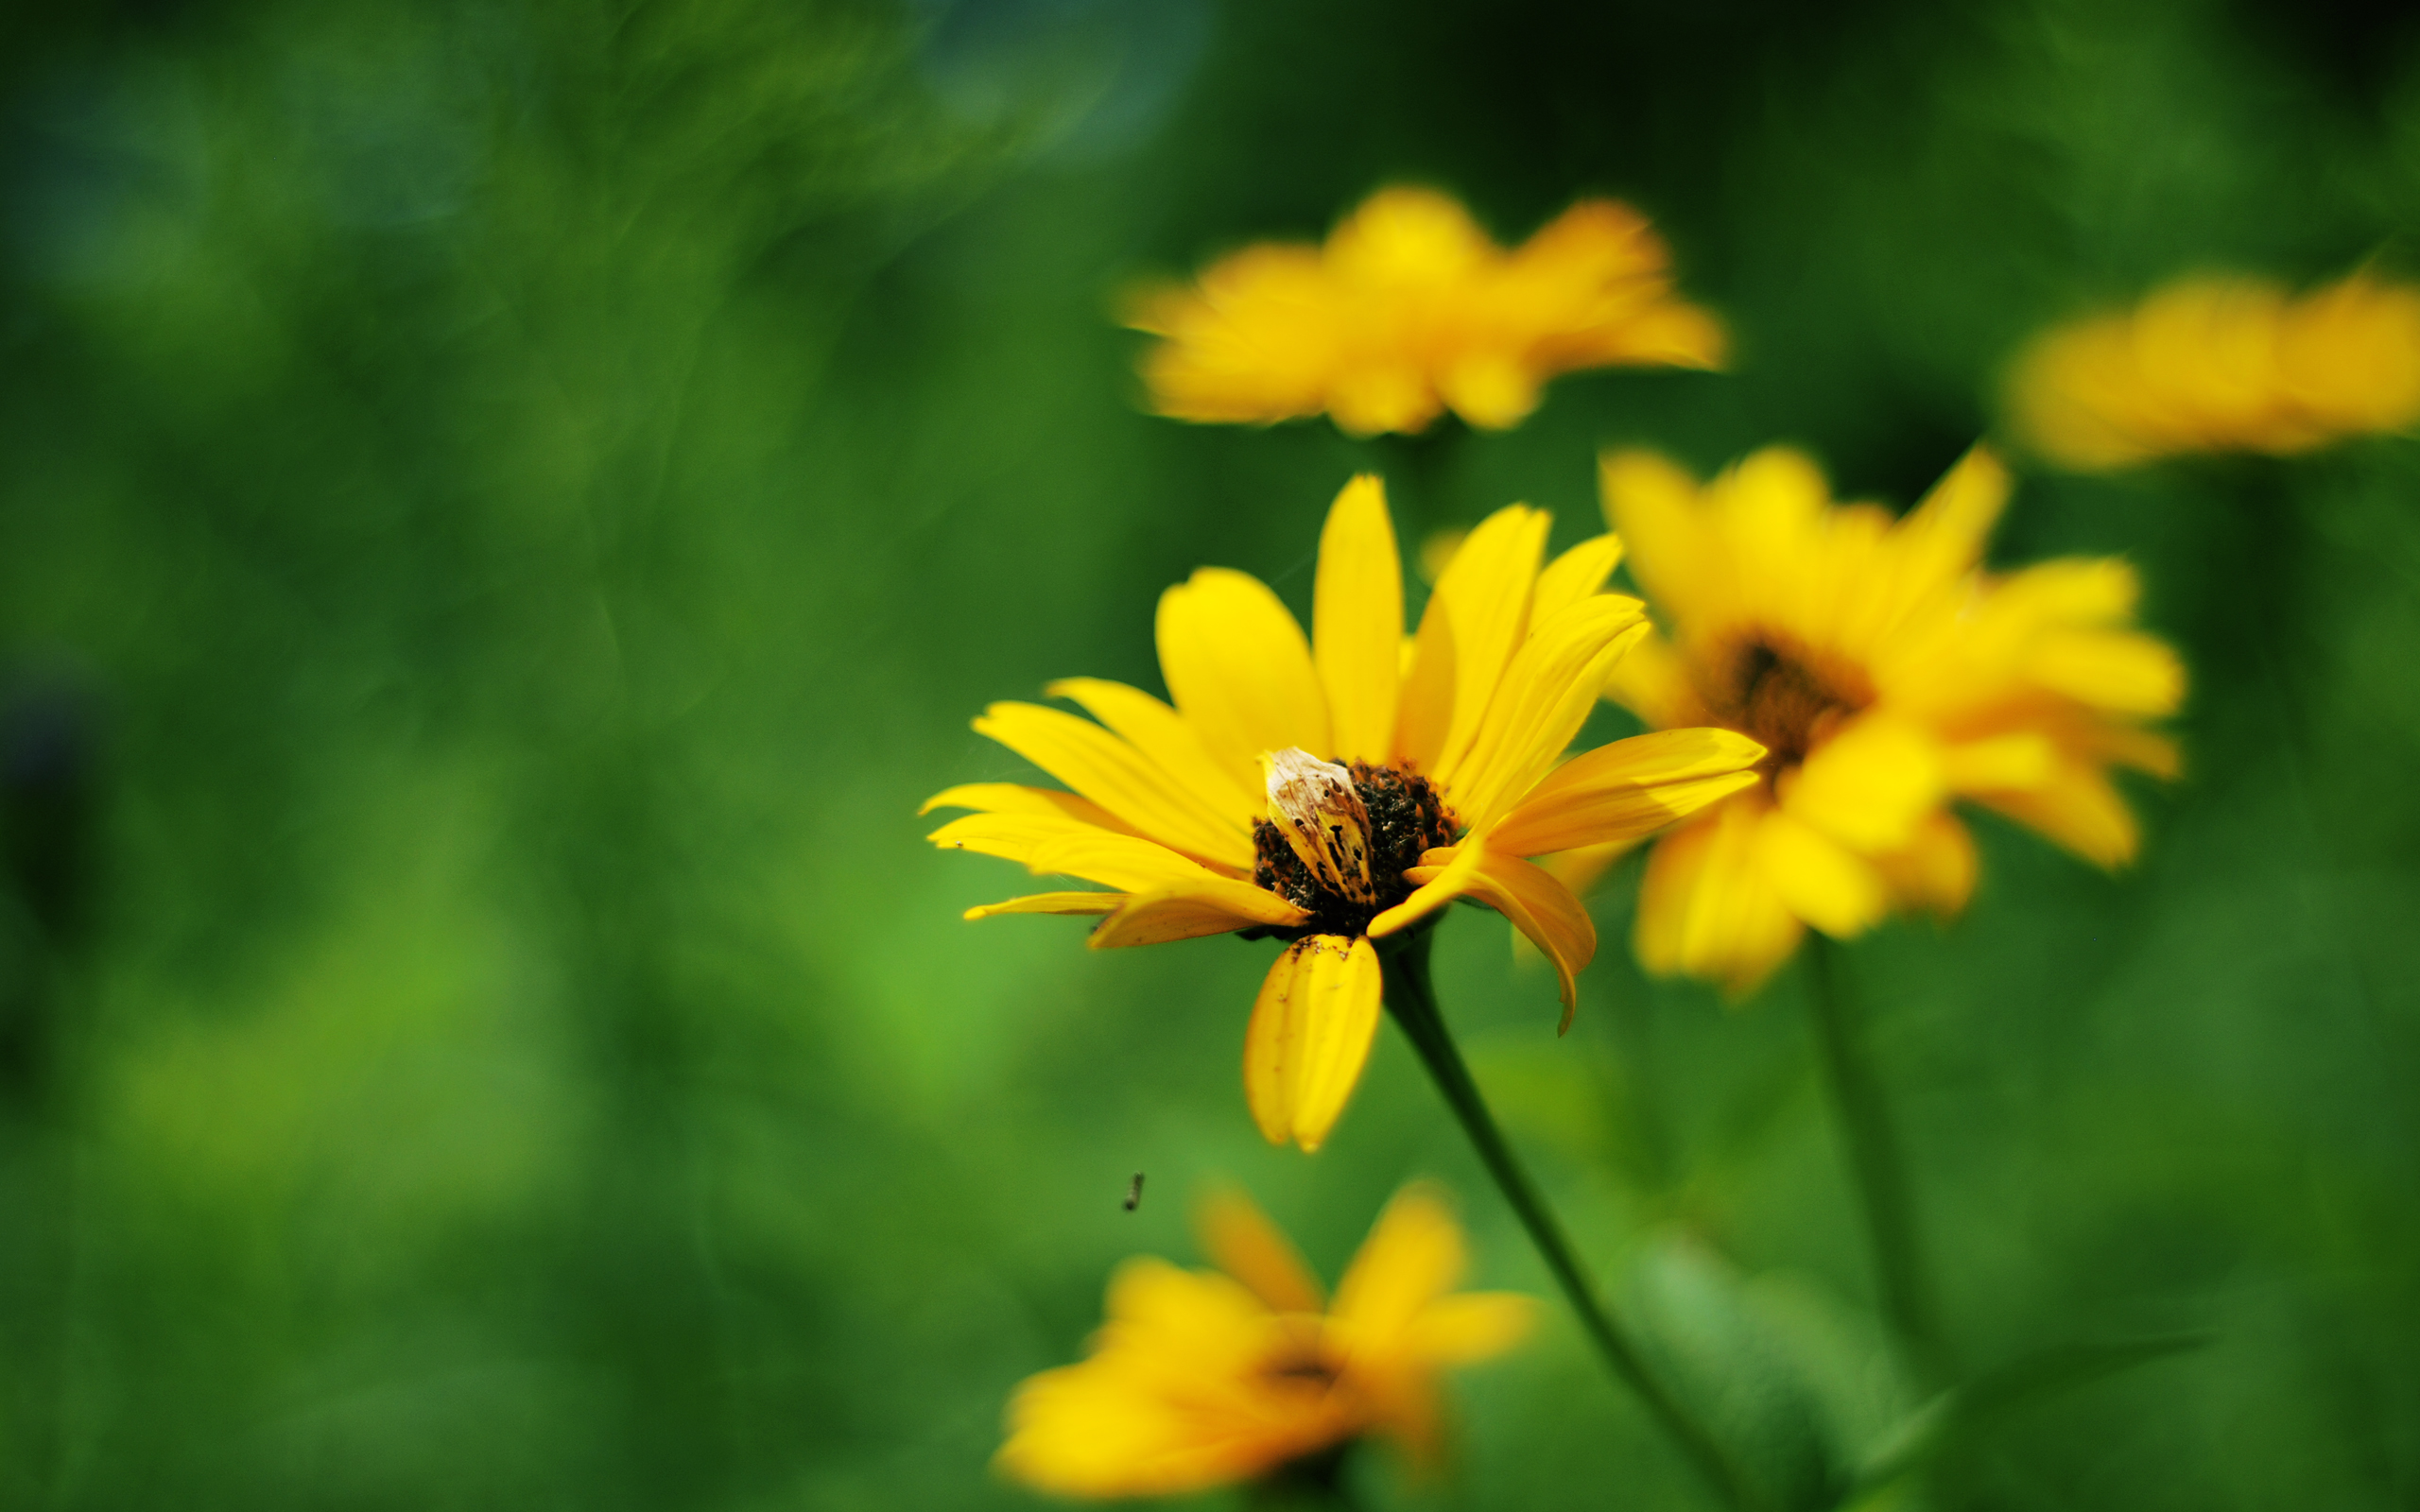 yellow summer flowers wallpapers hd wallpapers yellow summer flowers 2560x1600